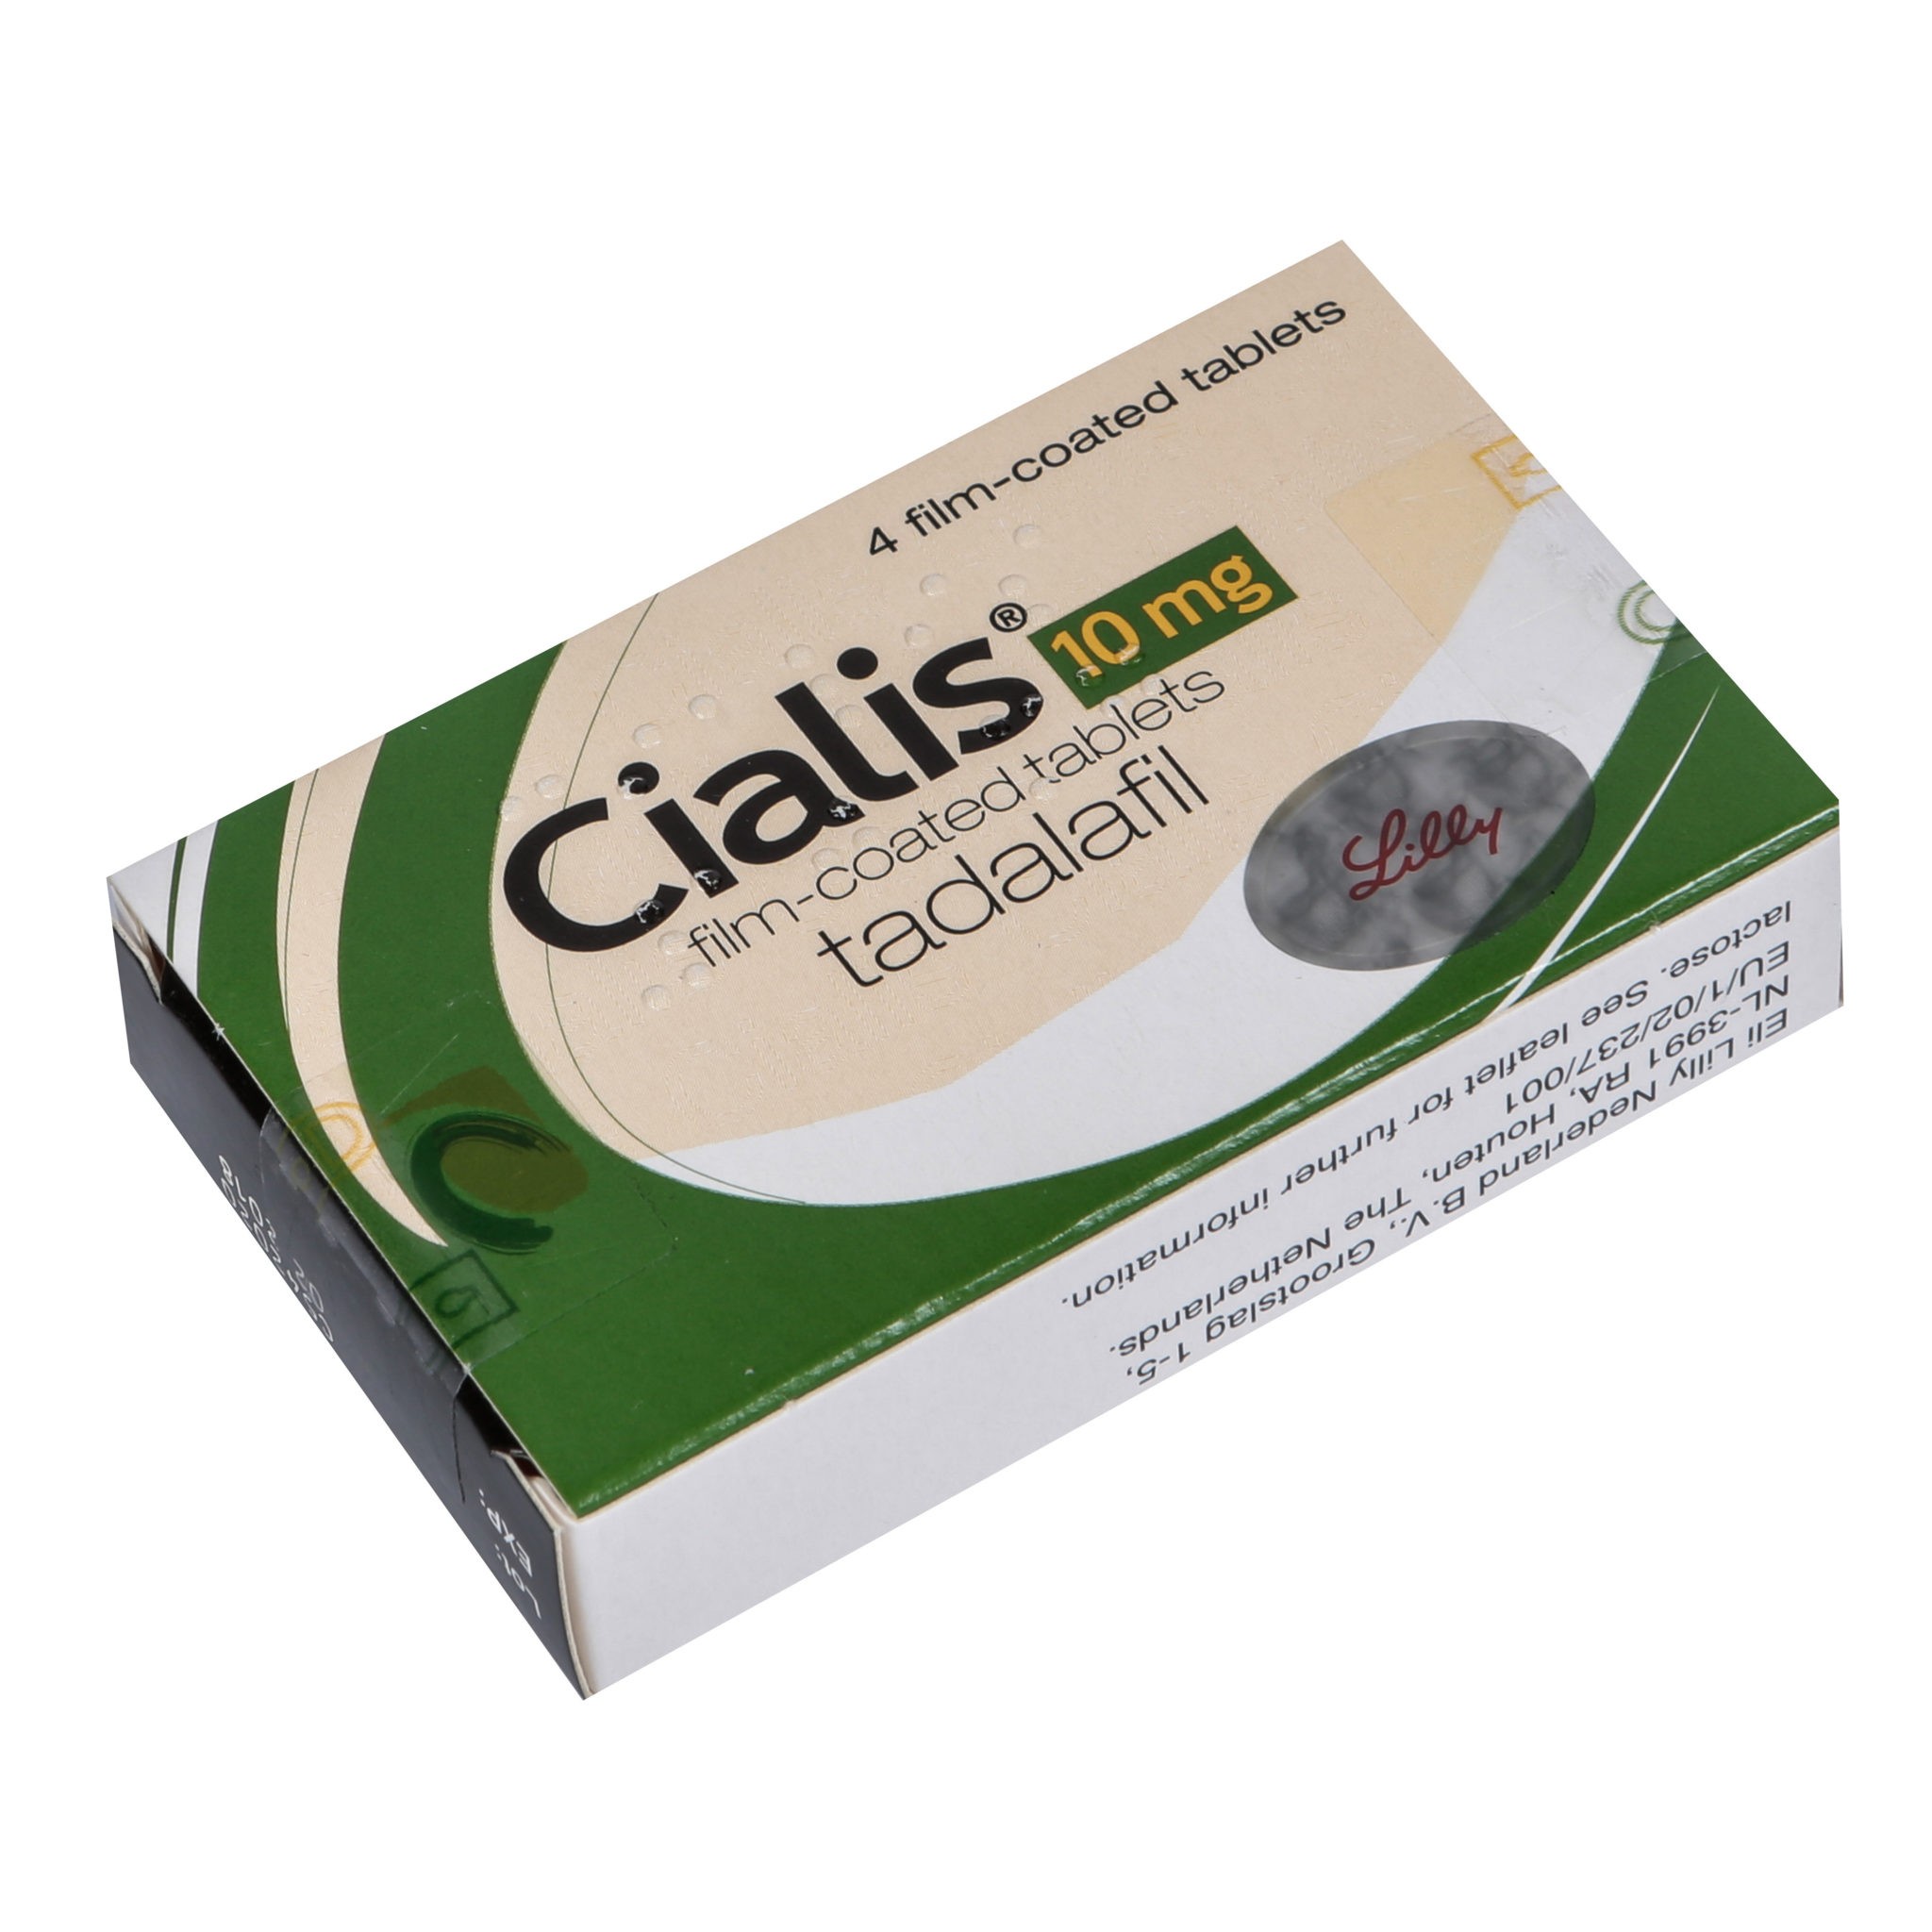 Cialis 10mg Tablets (28 Tablets)